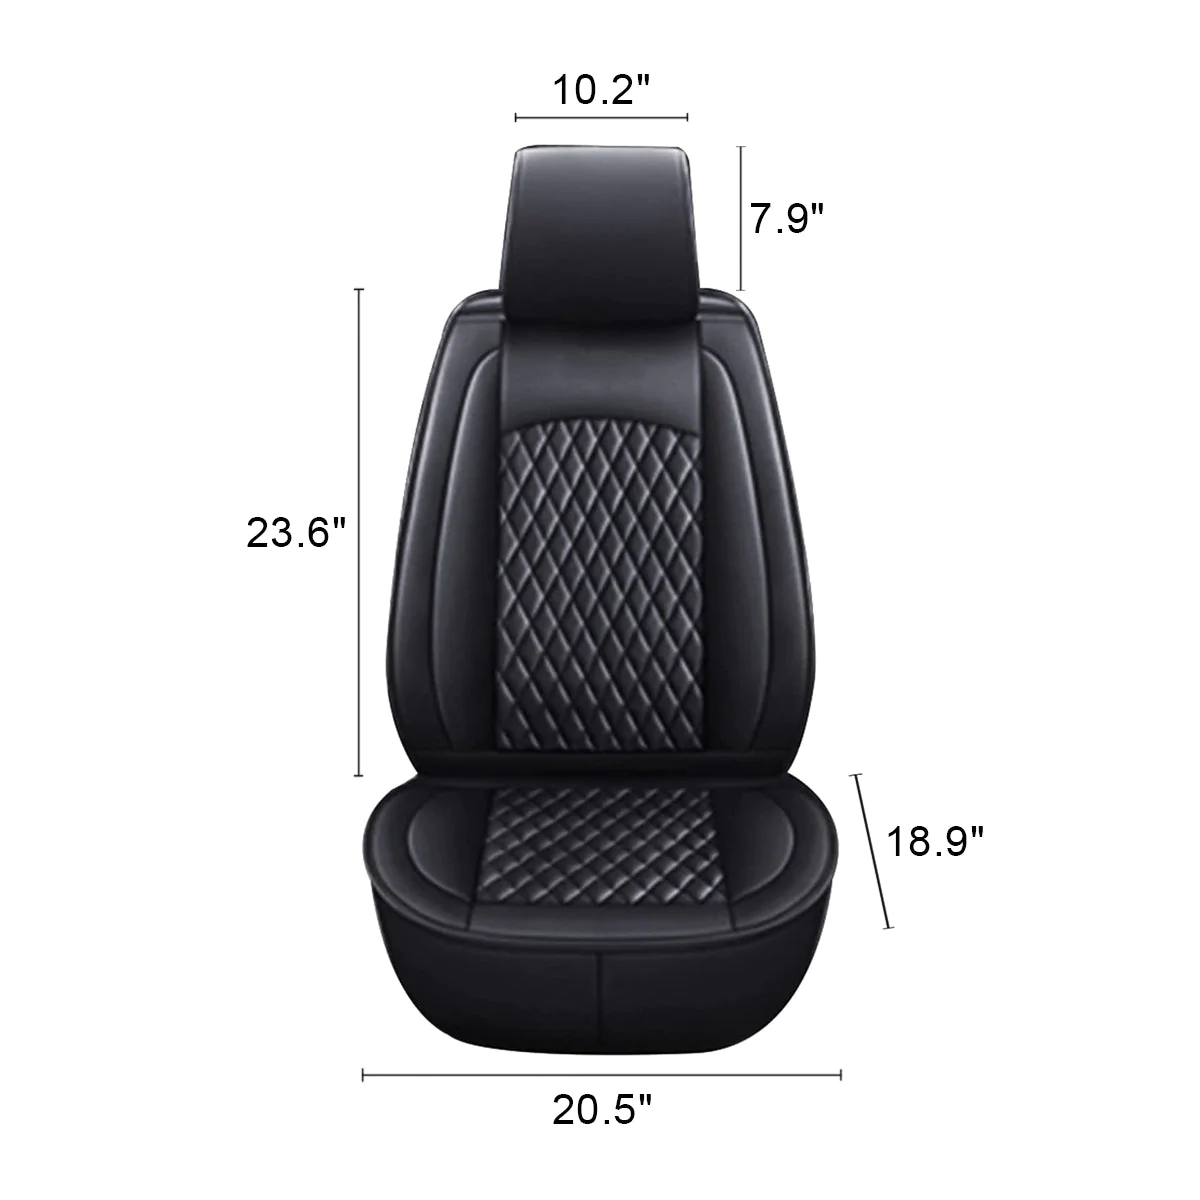 Custom Text For Seat Covers 5 Seats Full Set, Custom Fit For Your Cars, Leatherette Automotive Seat Cushion Protector Universal Fit, Vehicle Auto Interior Decor LM13988